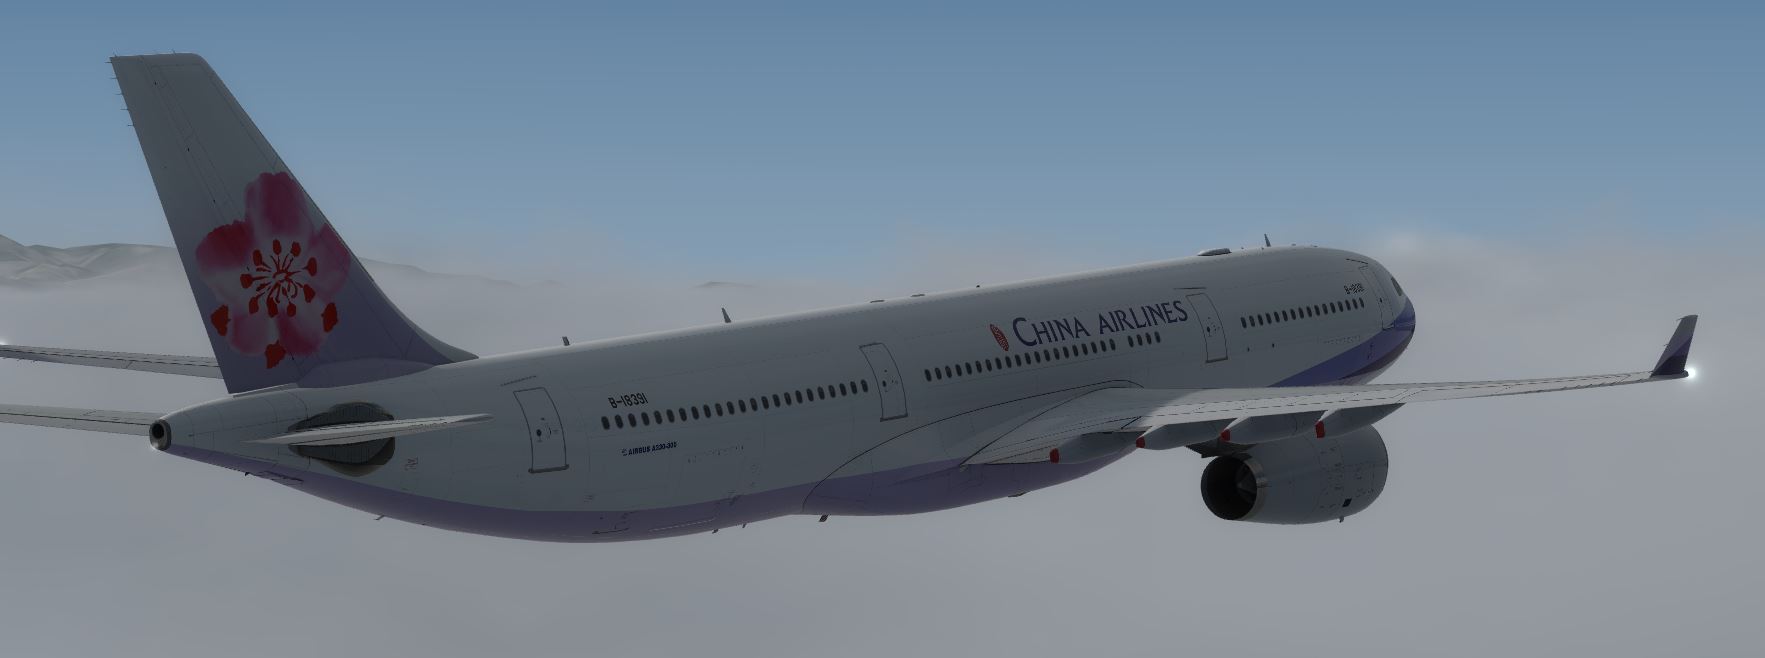 AS A330 ChinaAirline-3213 